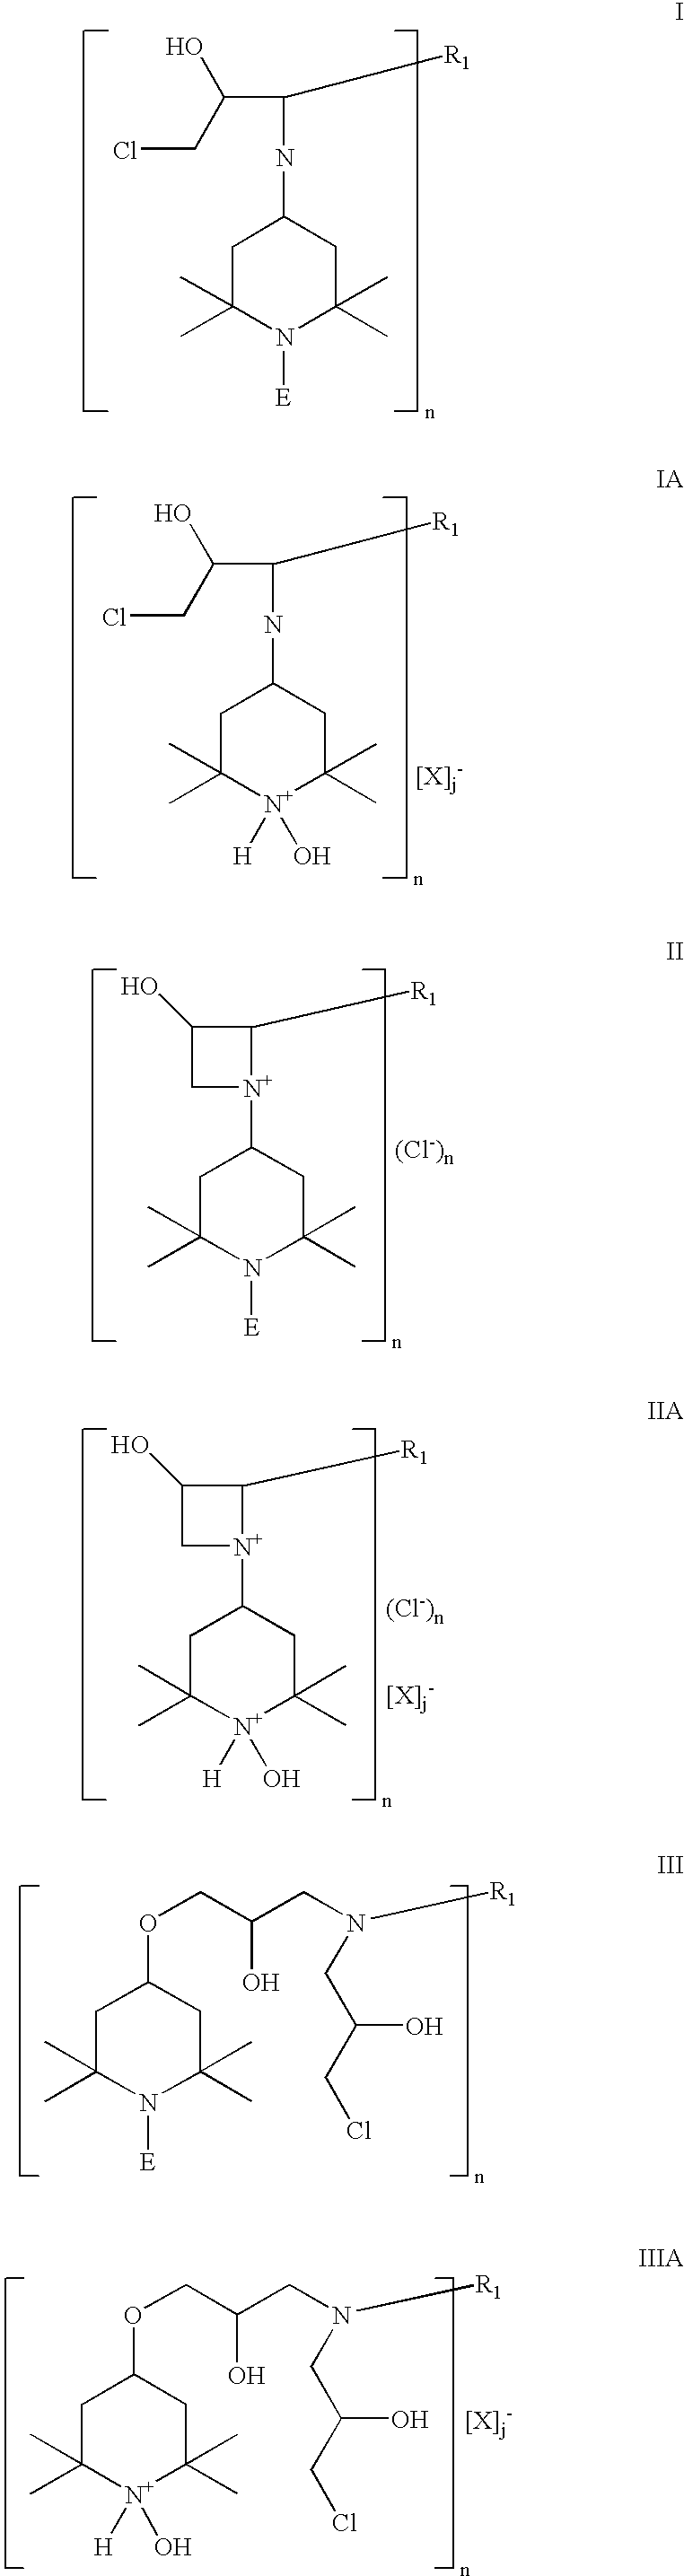 Chlorohydrin and cationic compounds having high affinity for pulp or paper